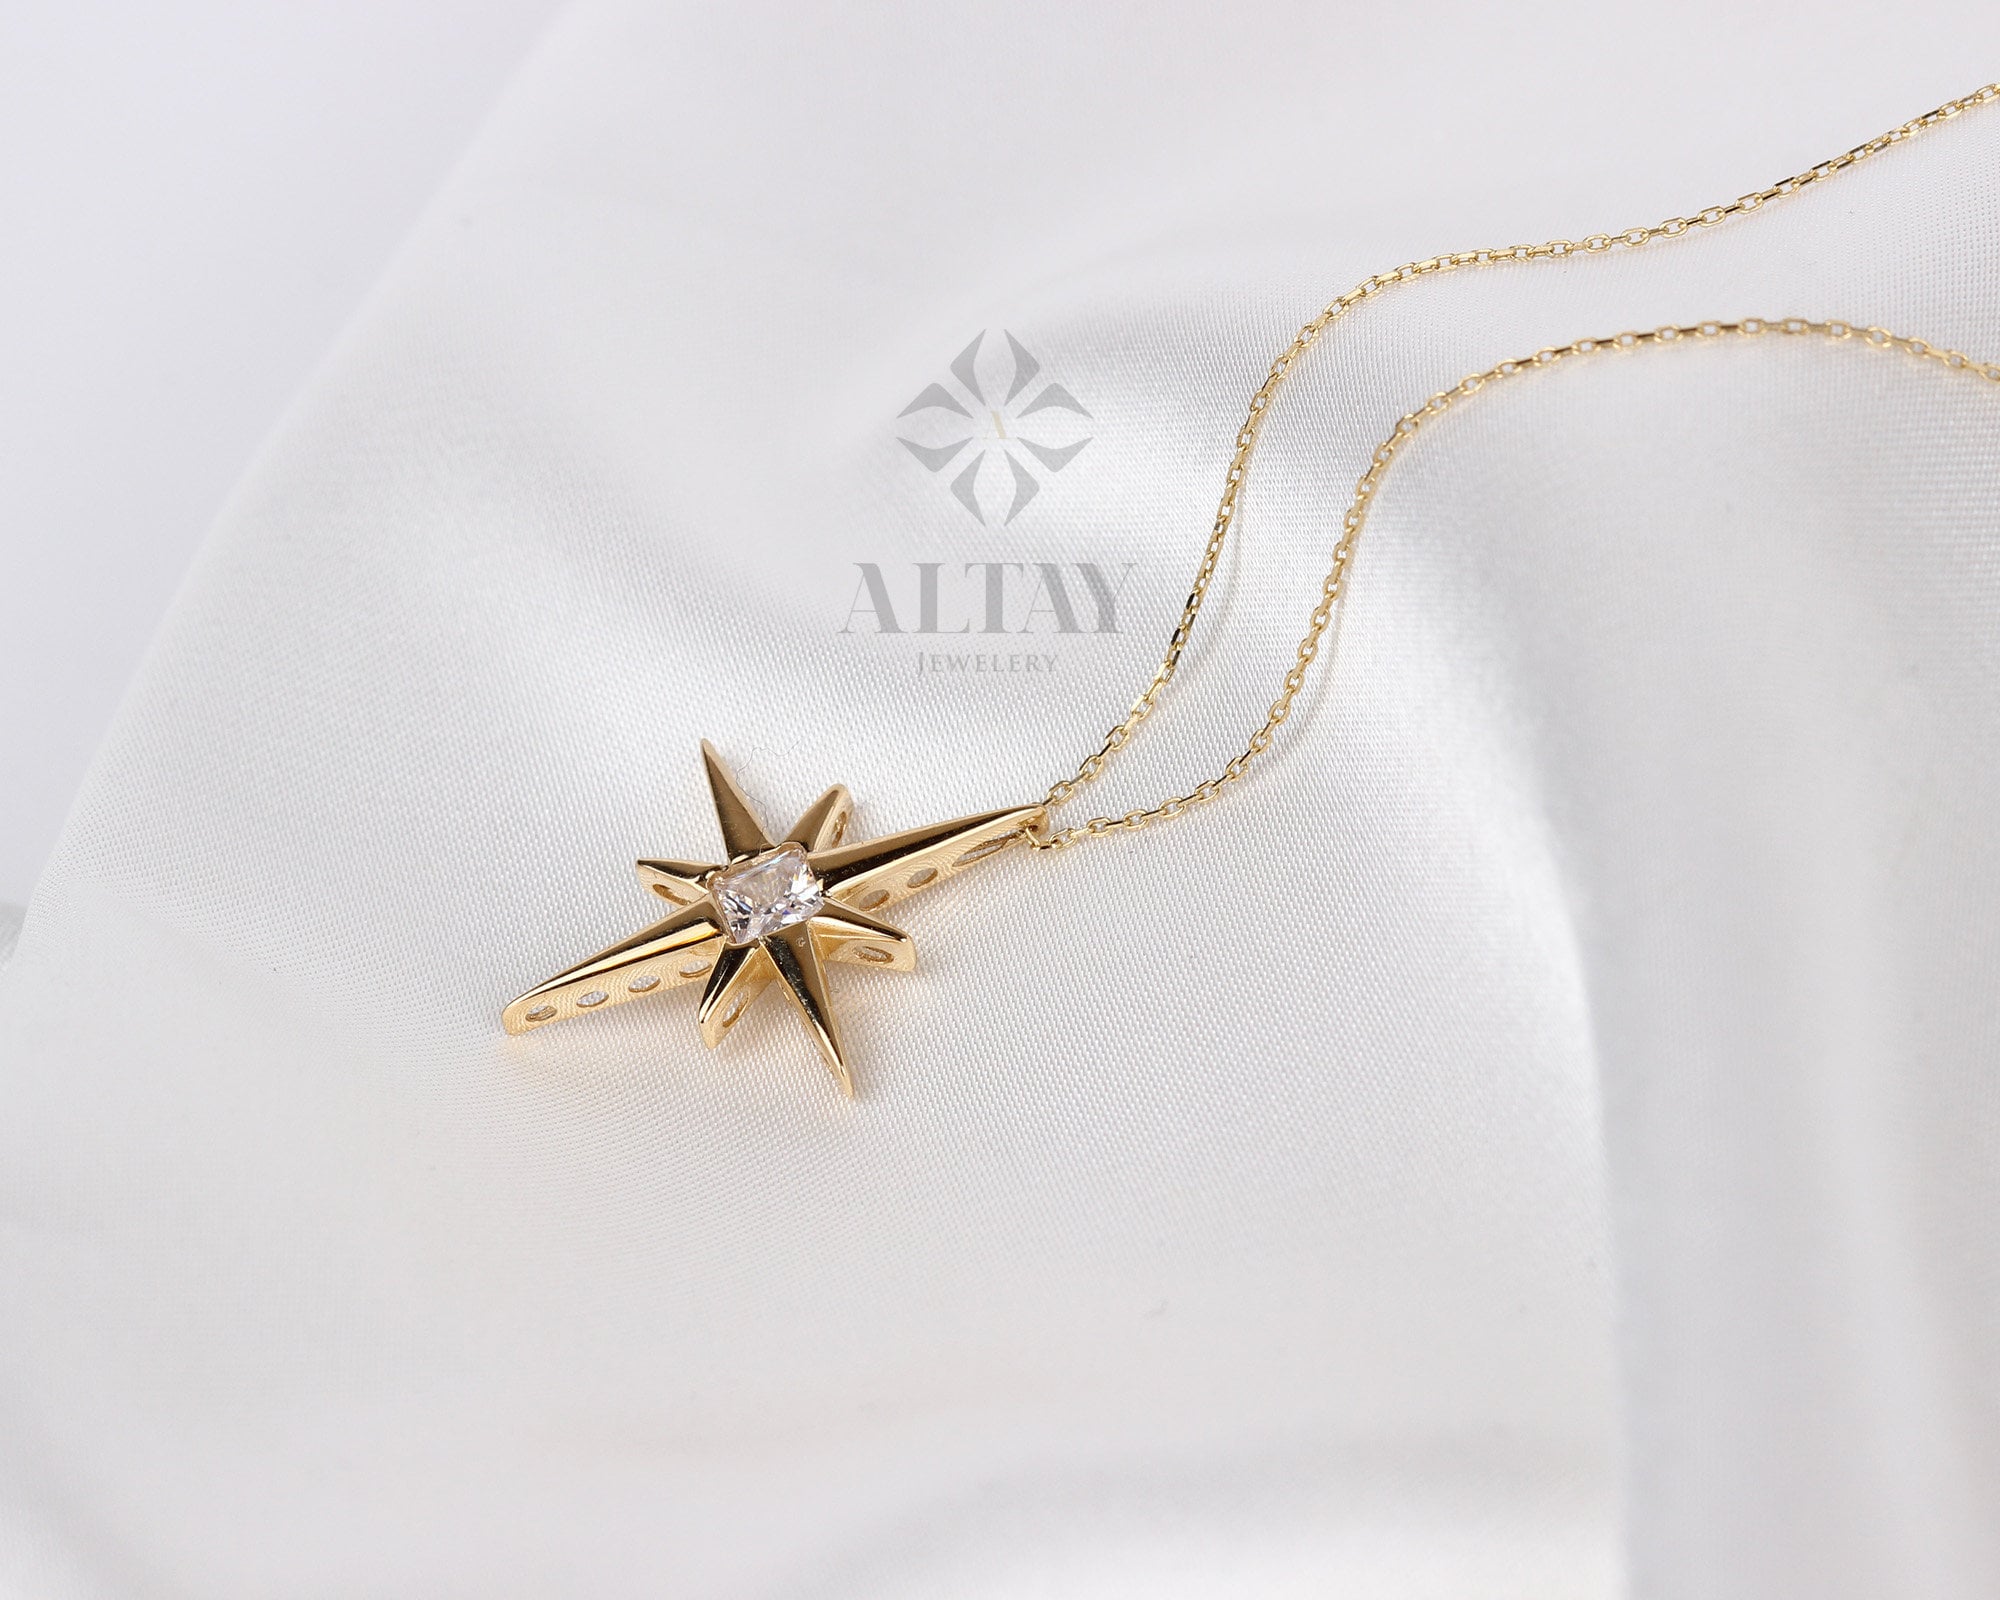 14K Gold North Star Necklace, Celestial North Star Pendant, Gift for Her, Minimalist, Dainty Layering Chain, Christmas, Valentines Day Gift